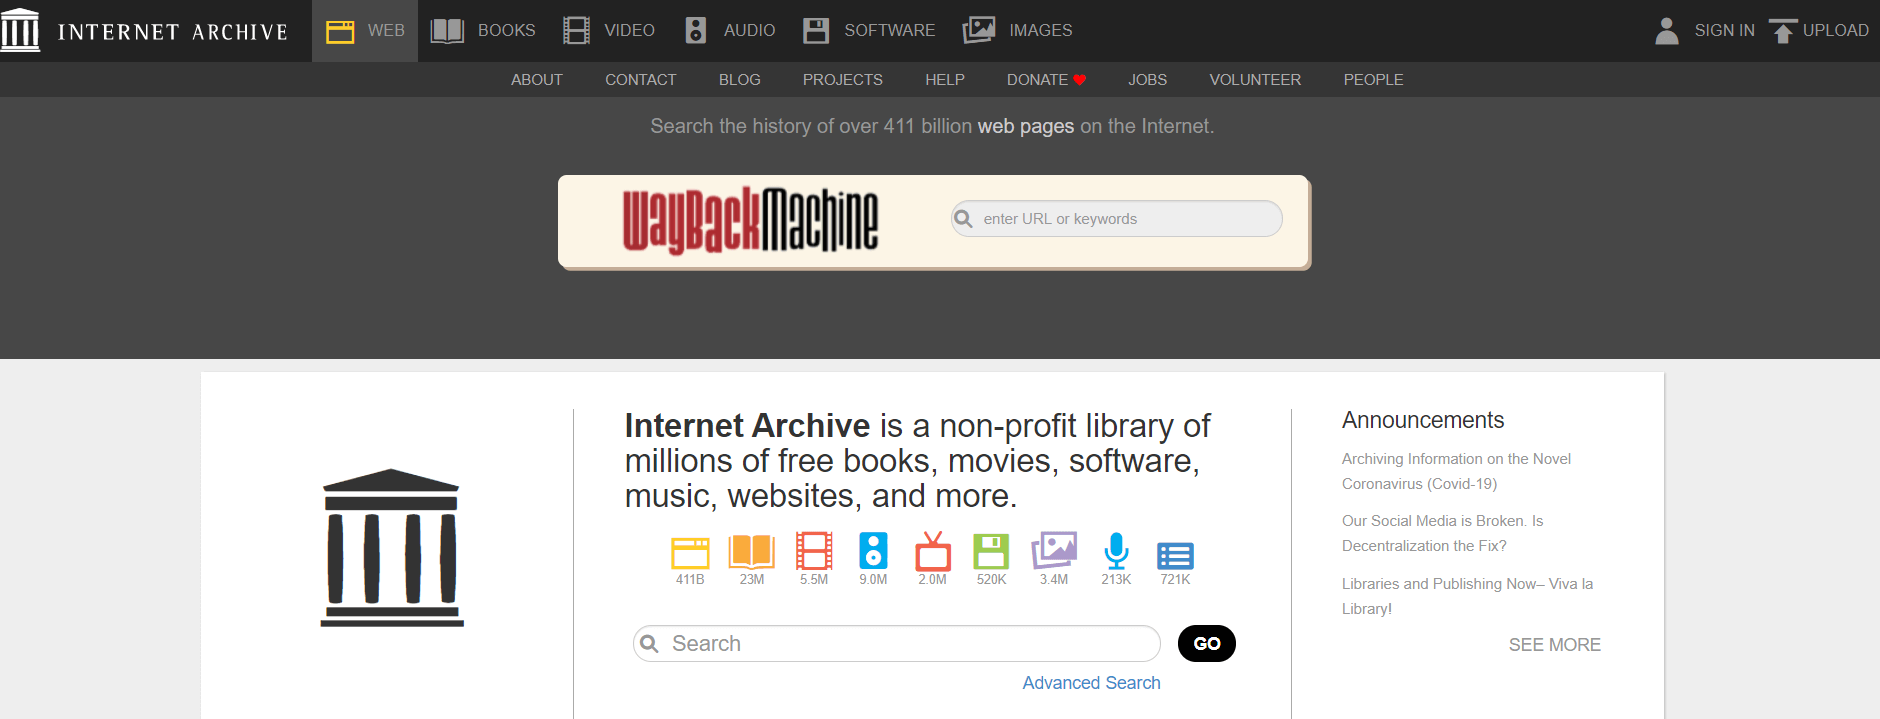 the-internet-archive-8210044